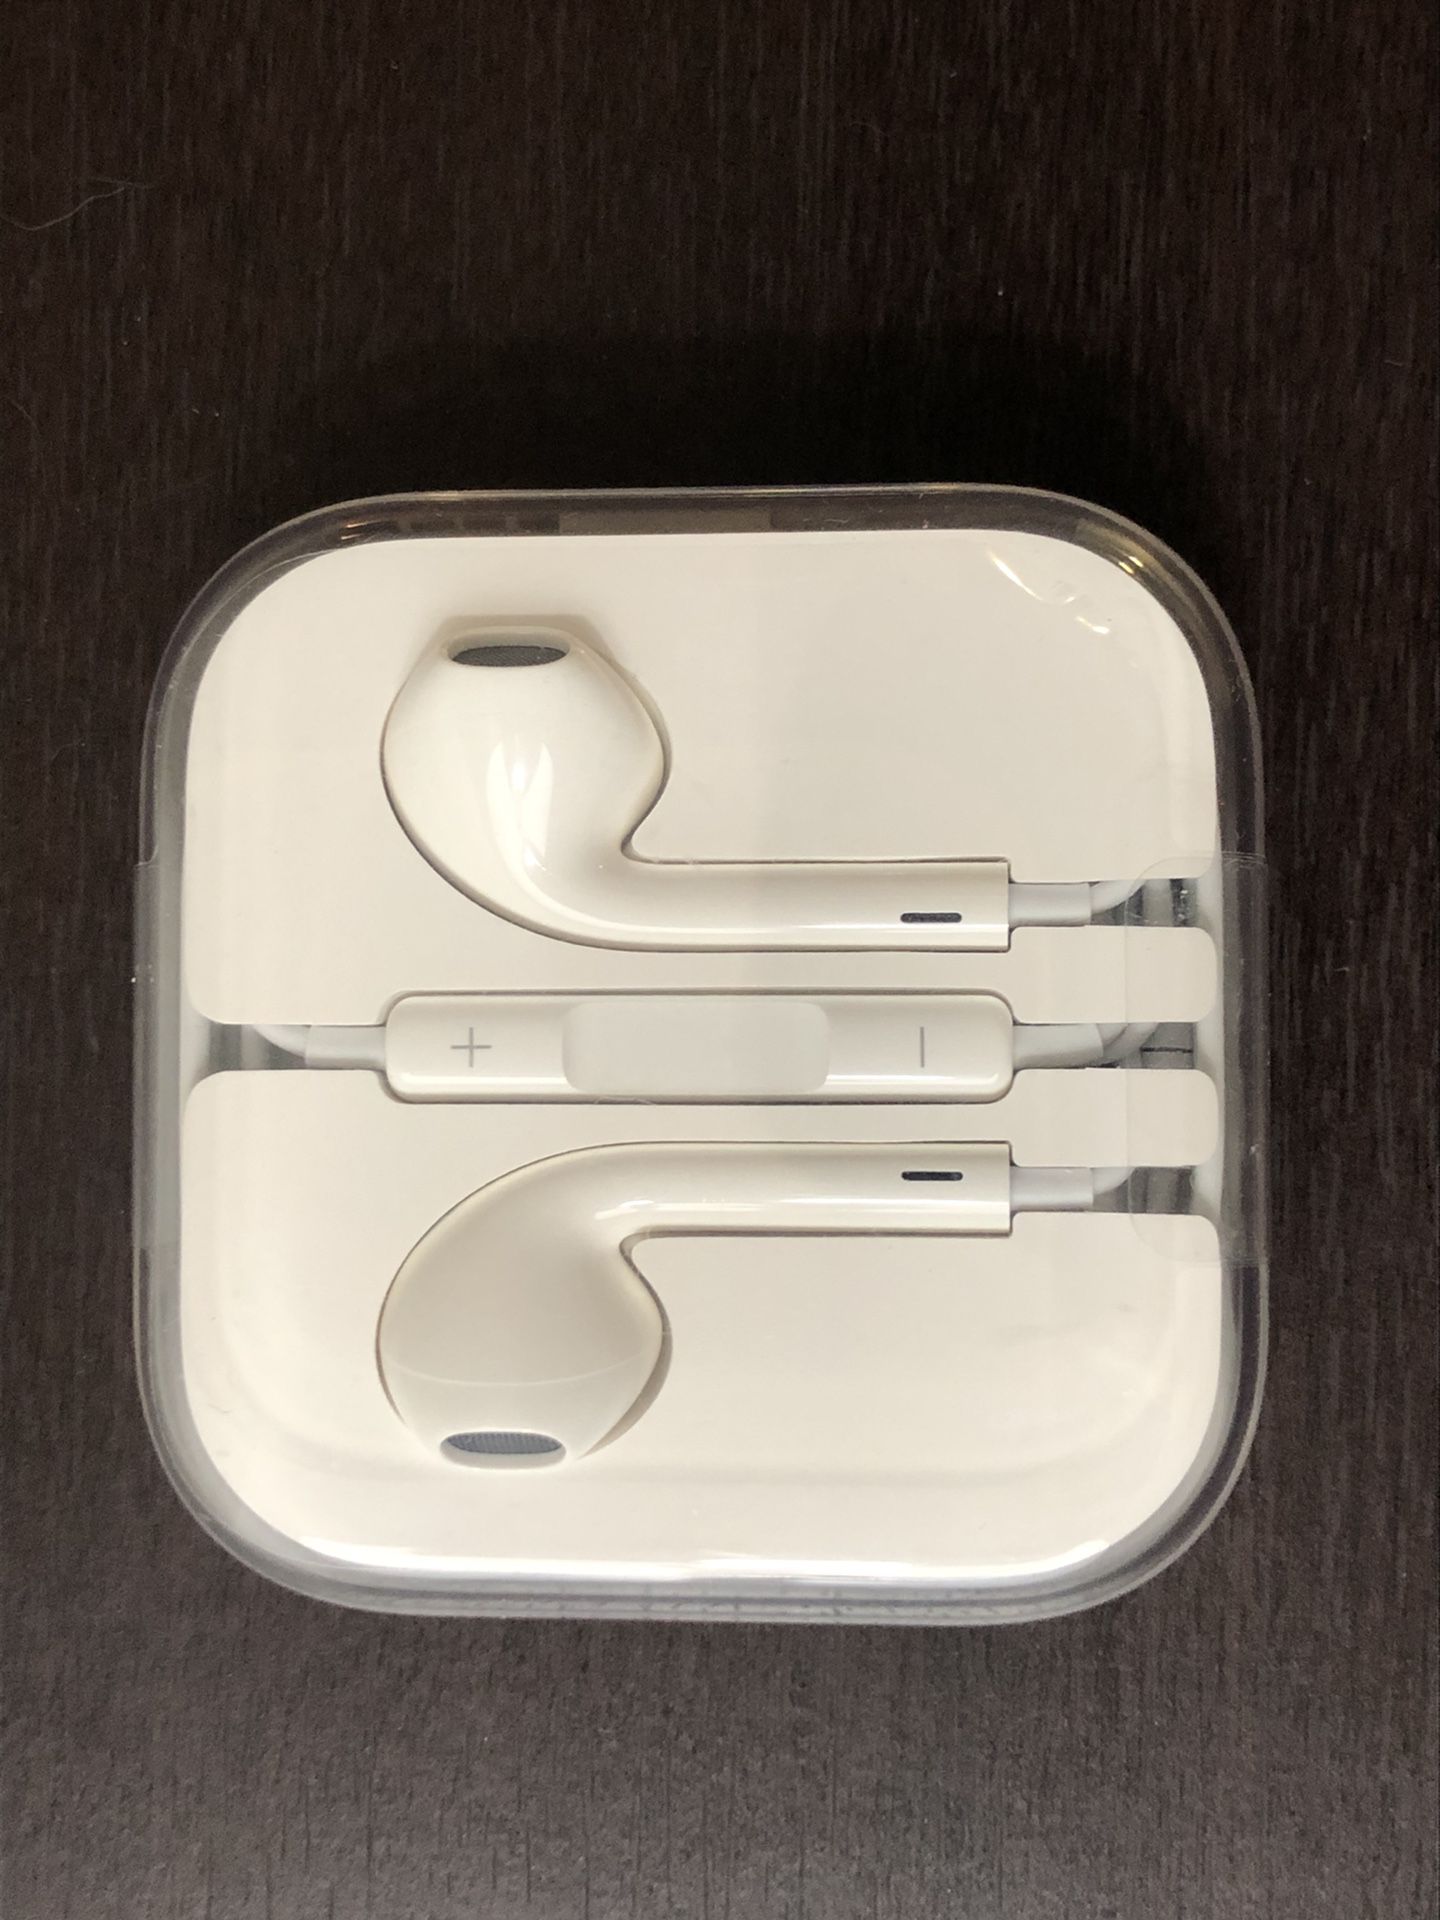 New Authentic Apple 3.5mm Earbuds iPhone 6S and Older